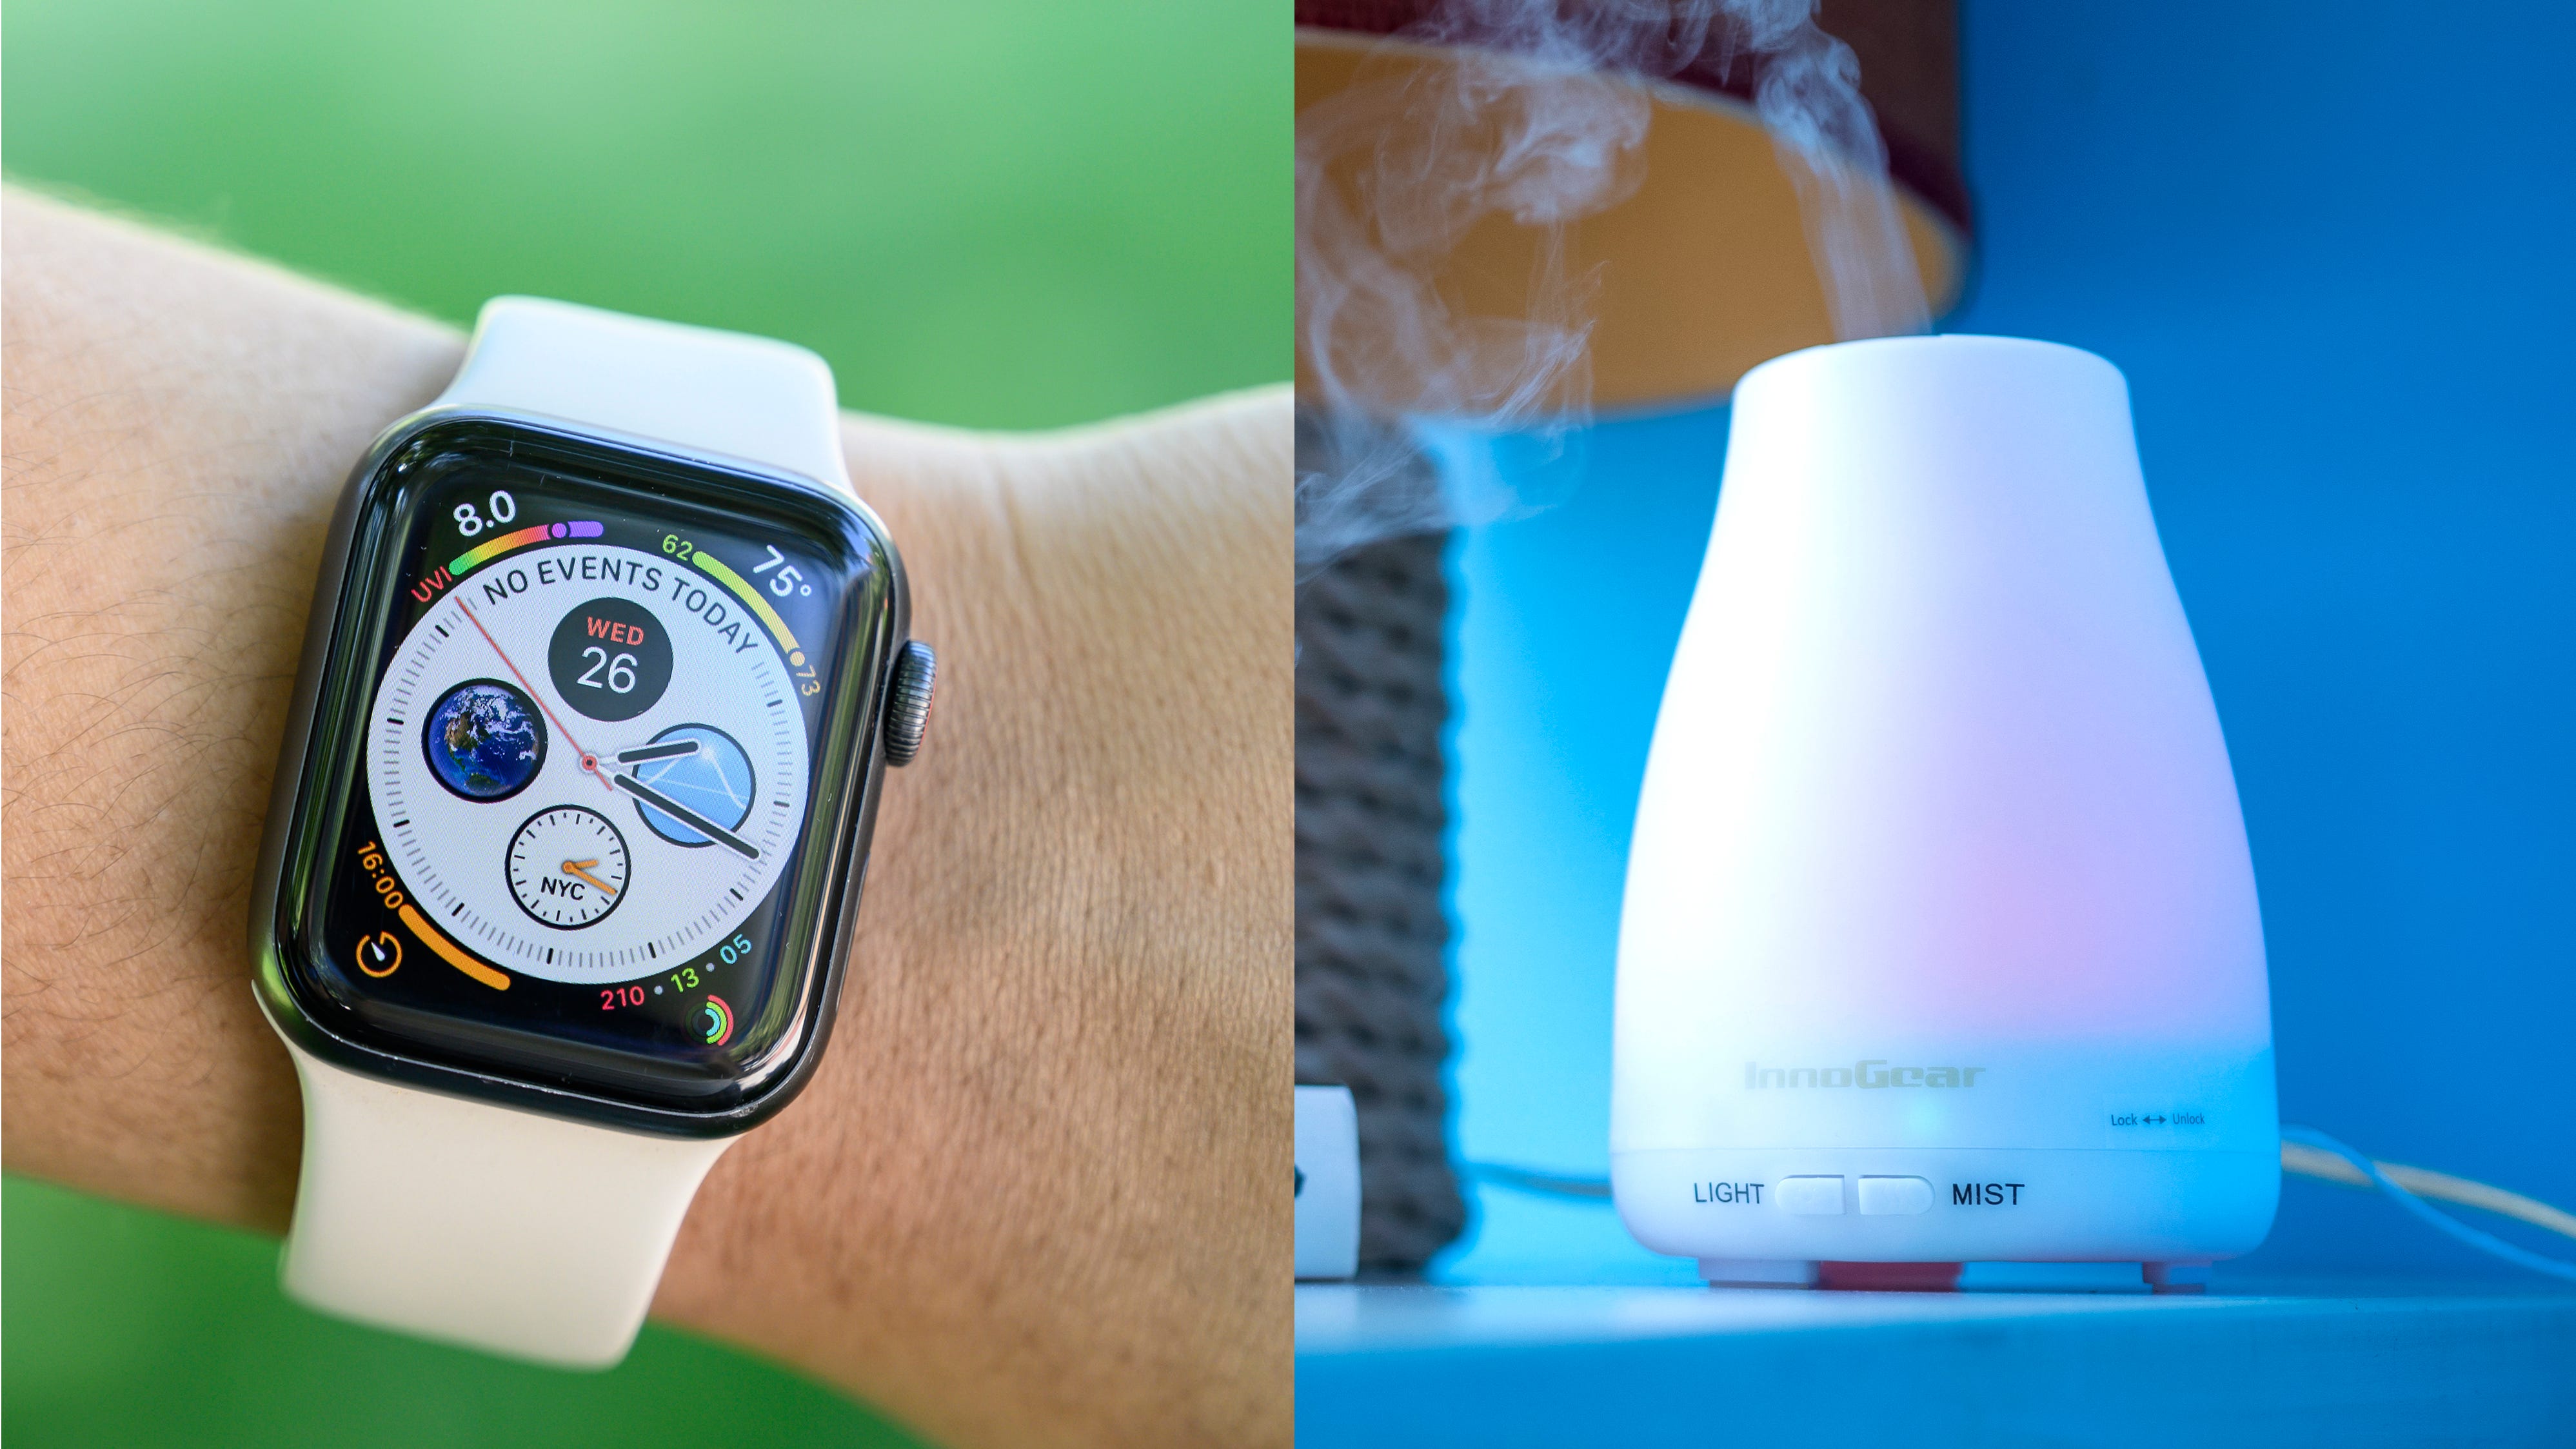 Apple Watch Series 4, Dyson V11 vacuum, and more